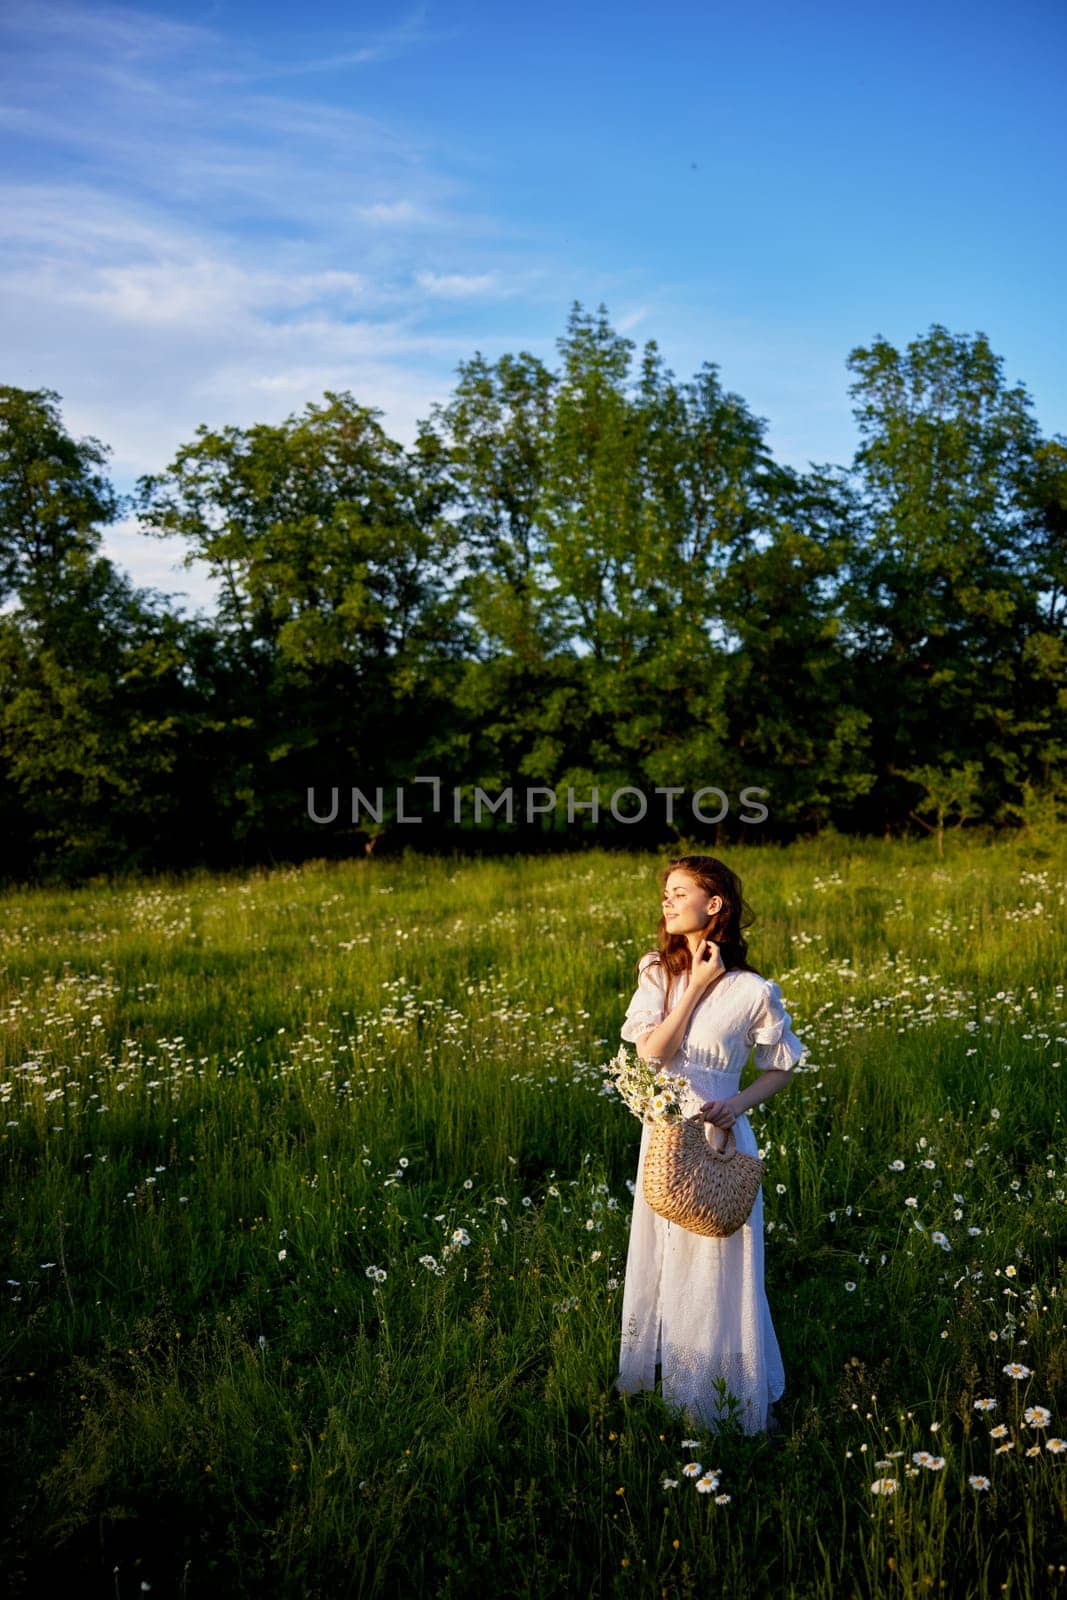 a beautiful woman stands in a flowering field on a sunny day in a light summer dress and with a wicker basket full of flowers by Vichizh